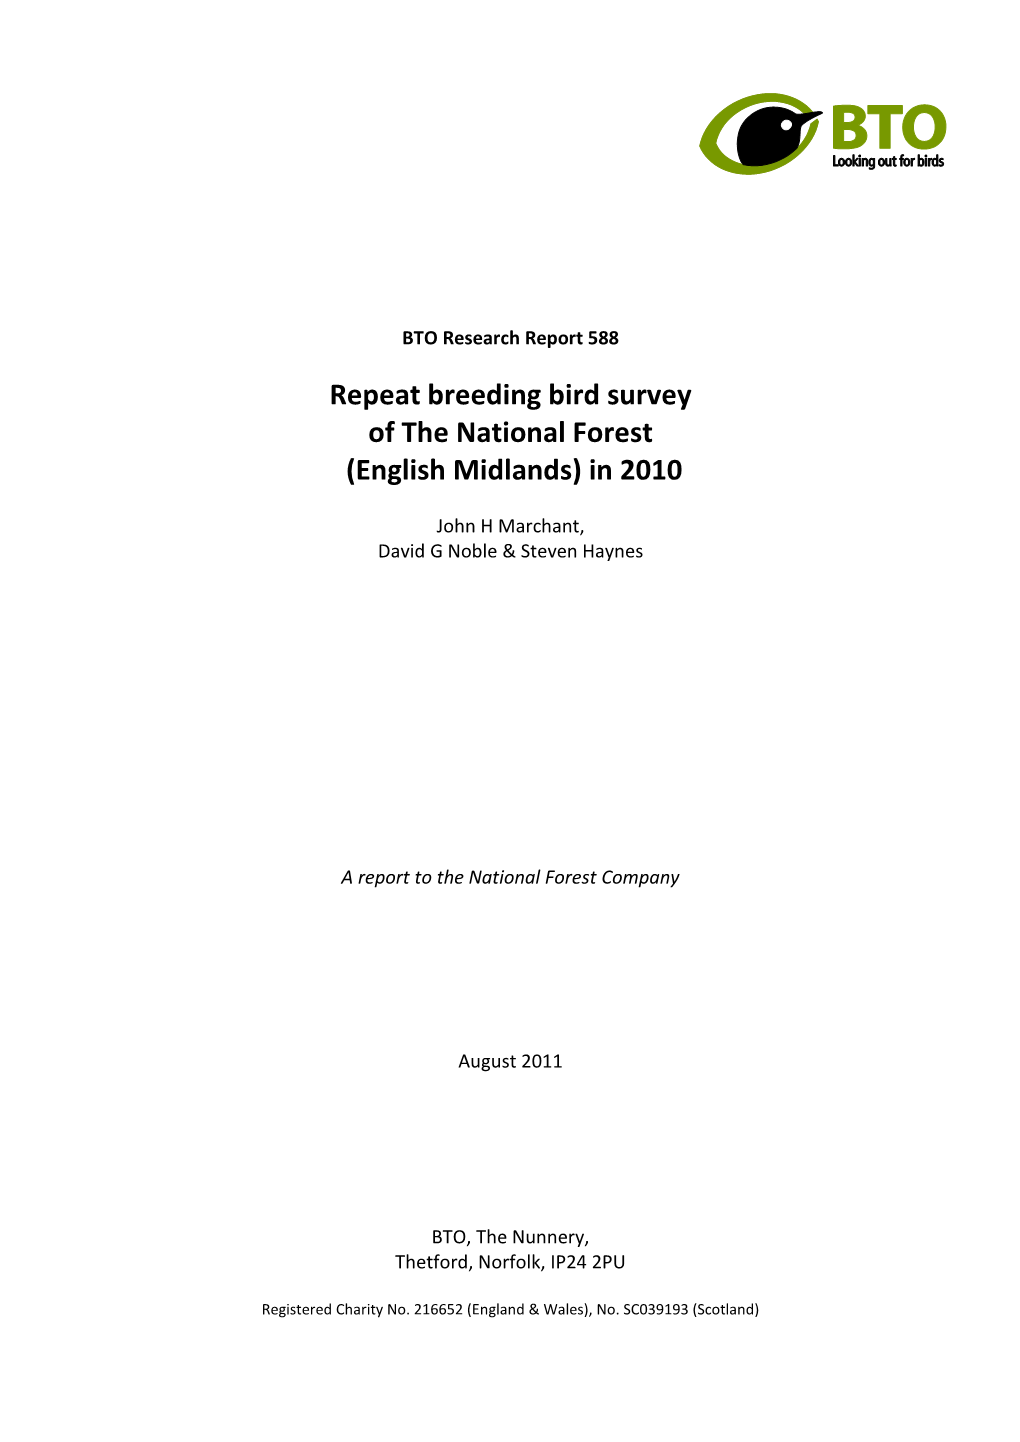 Repeat Breeding Bird Survey of the National Forest (English Midlands) in 2010